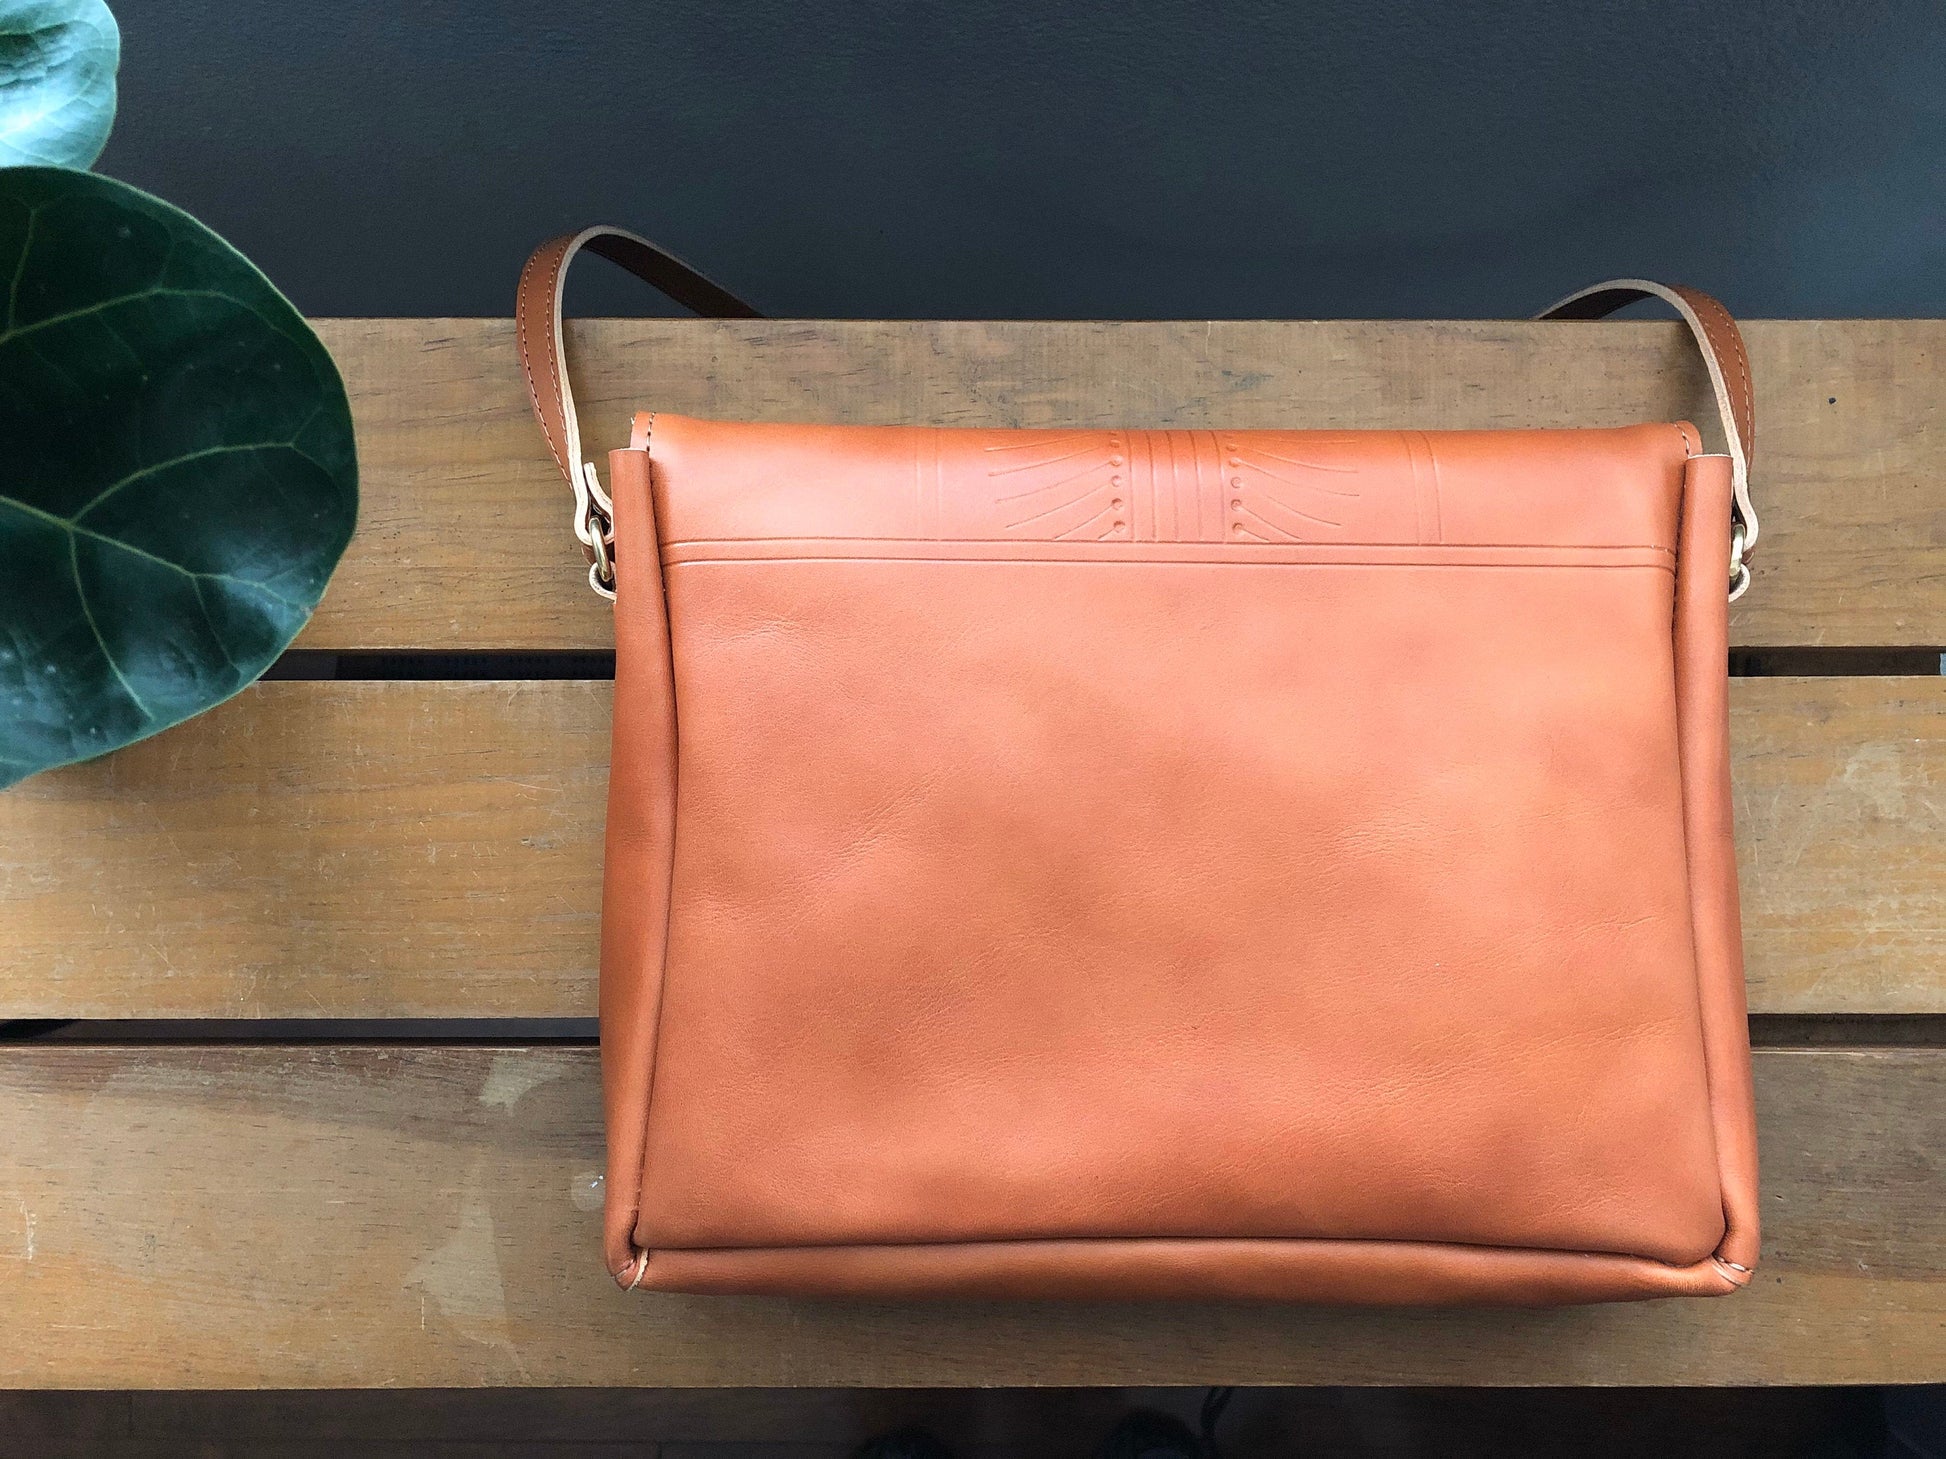 Back of tan leather crossbody bag with small tooling detail. Resting on table near plant